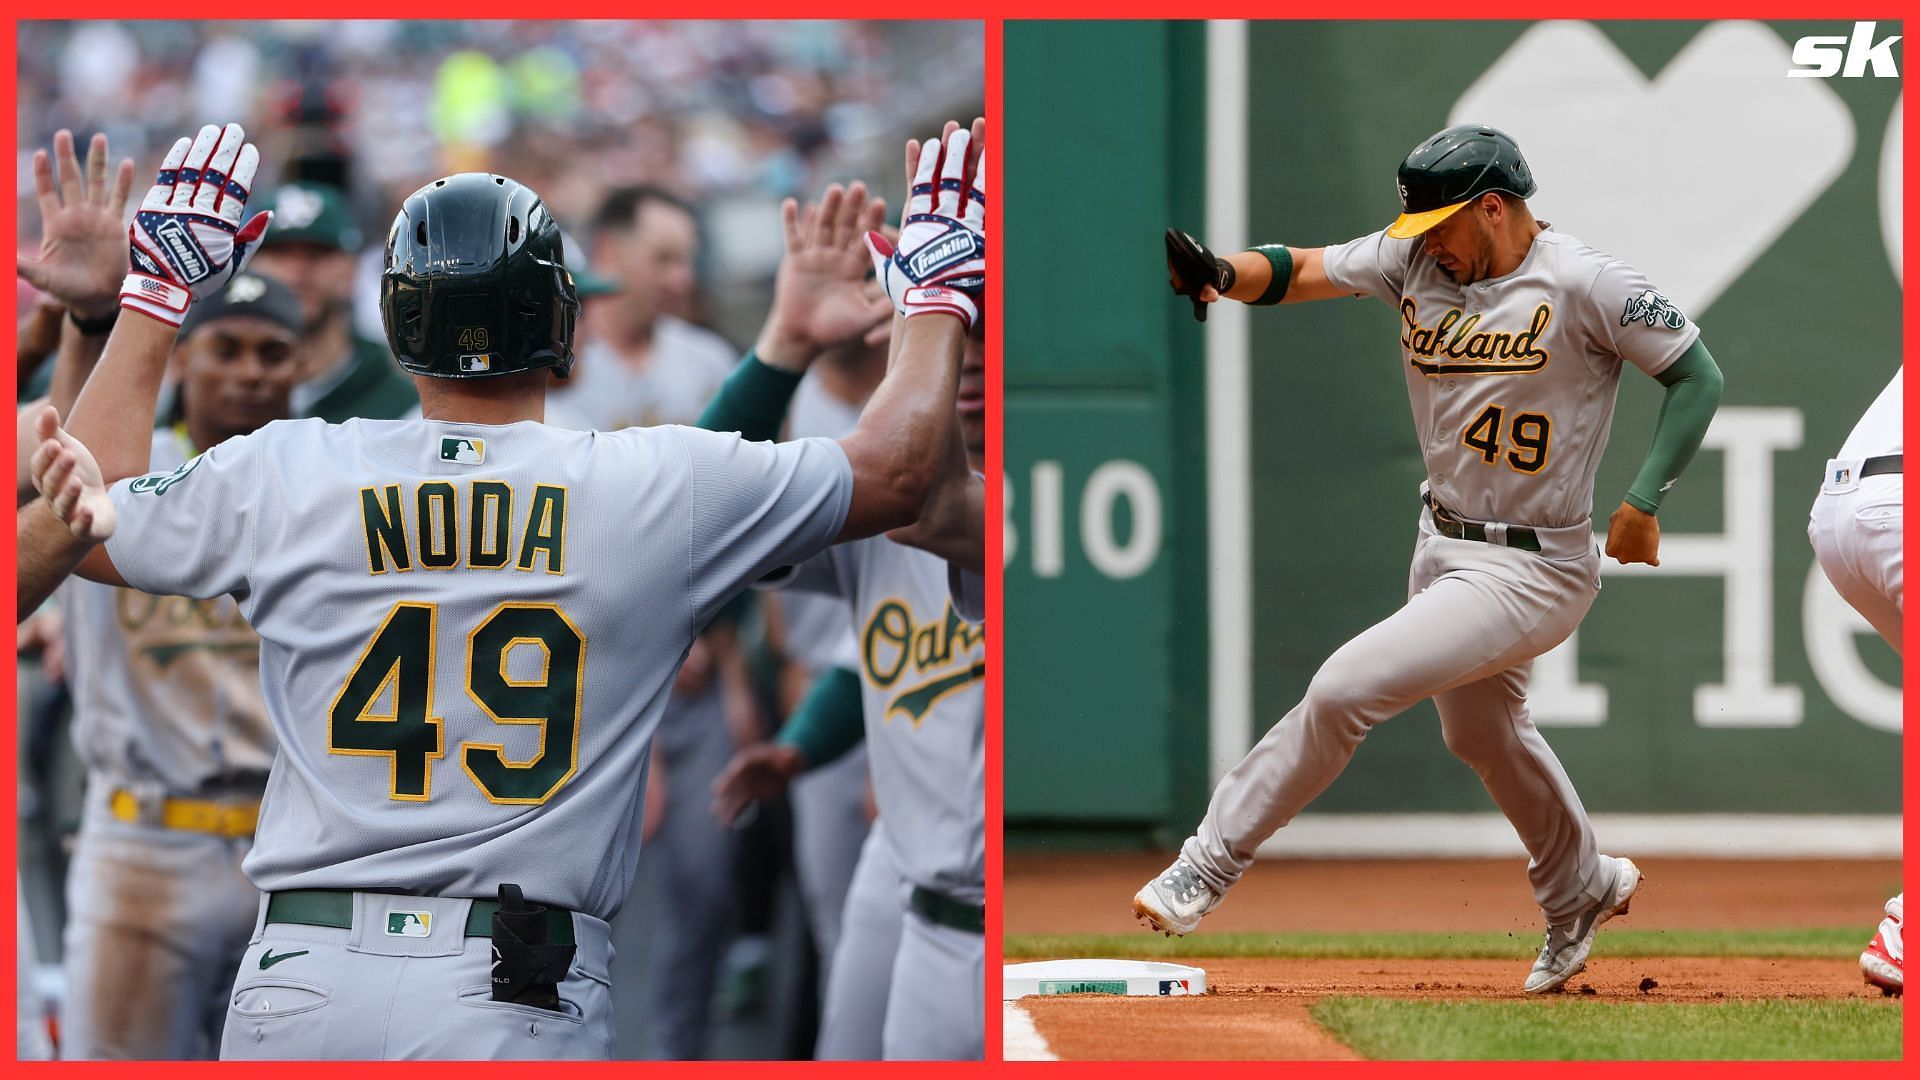 Ryan Noda of the Oakland Athletics rounds third base against the Boston Red Sox